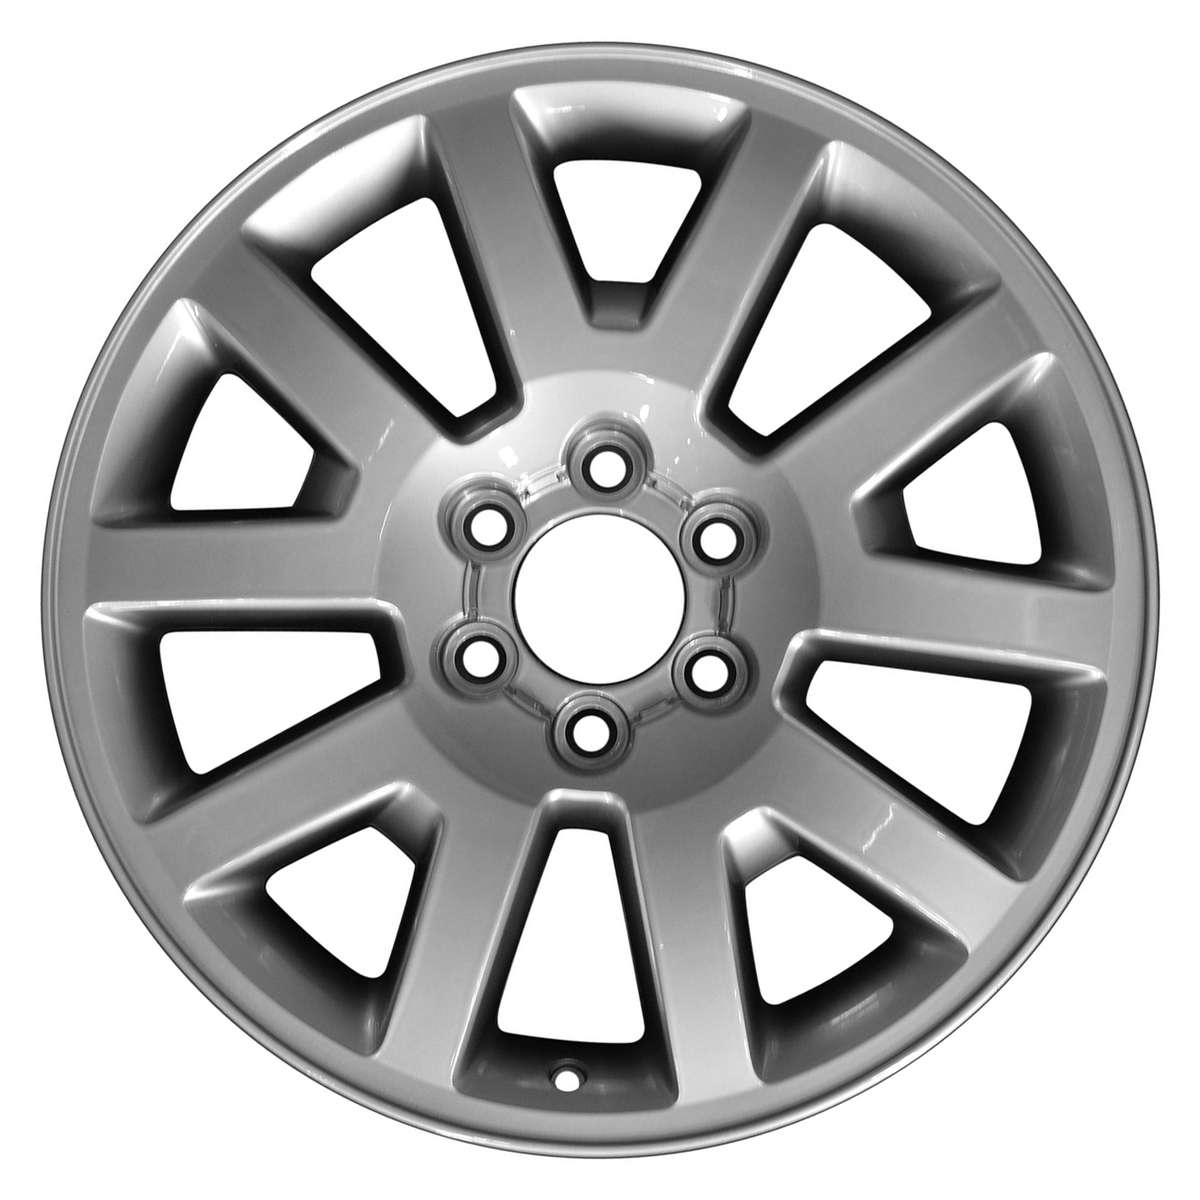 2010 Ford Expedition 20" OEM Wheel Rim W3789S